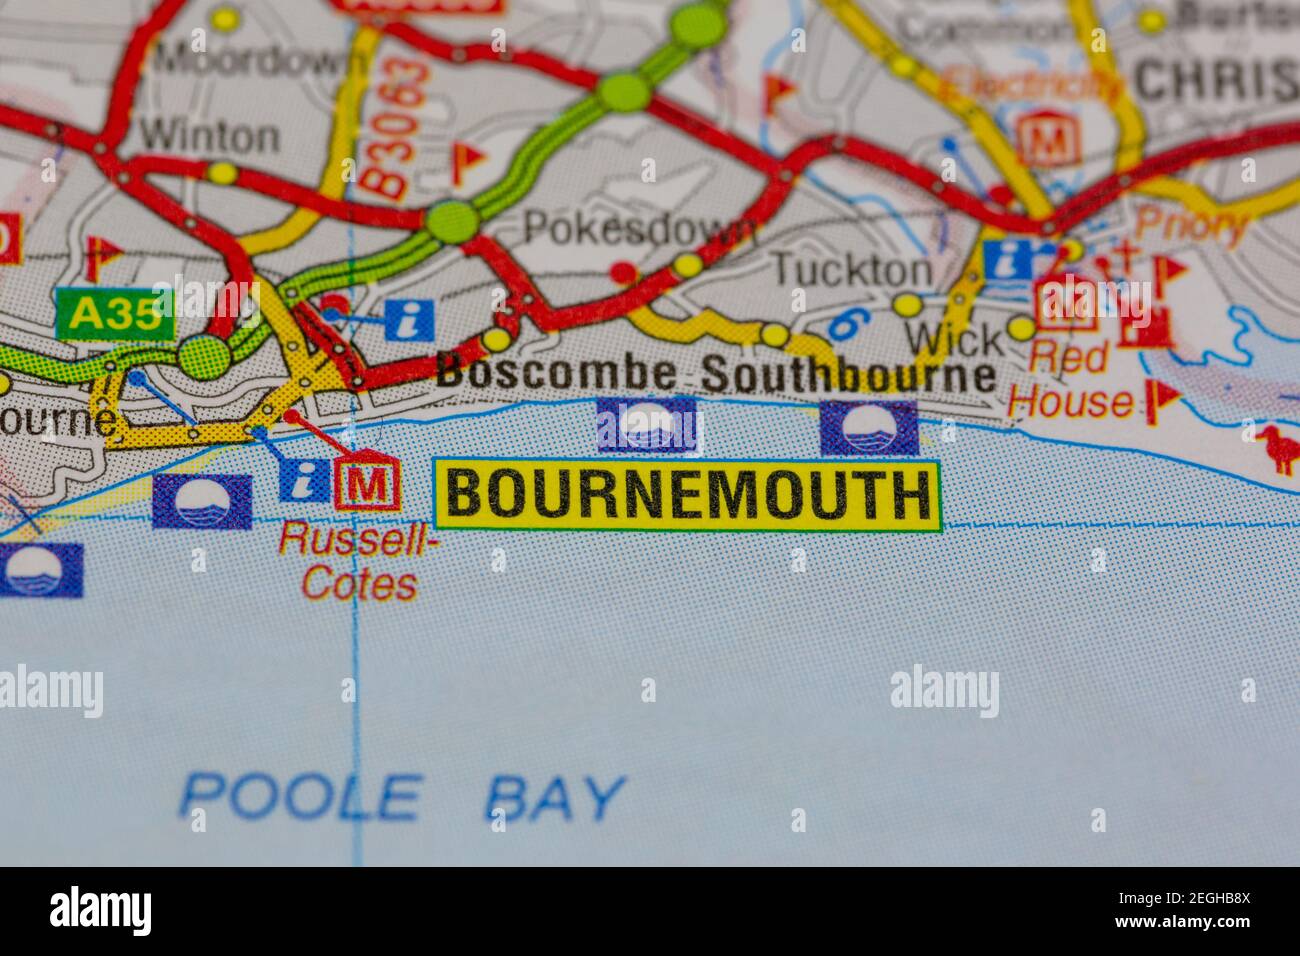 Bournemouth And Surrounding Areas Shown On A Road Map Or Geography Map 2EGHB8X 